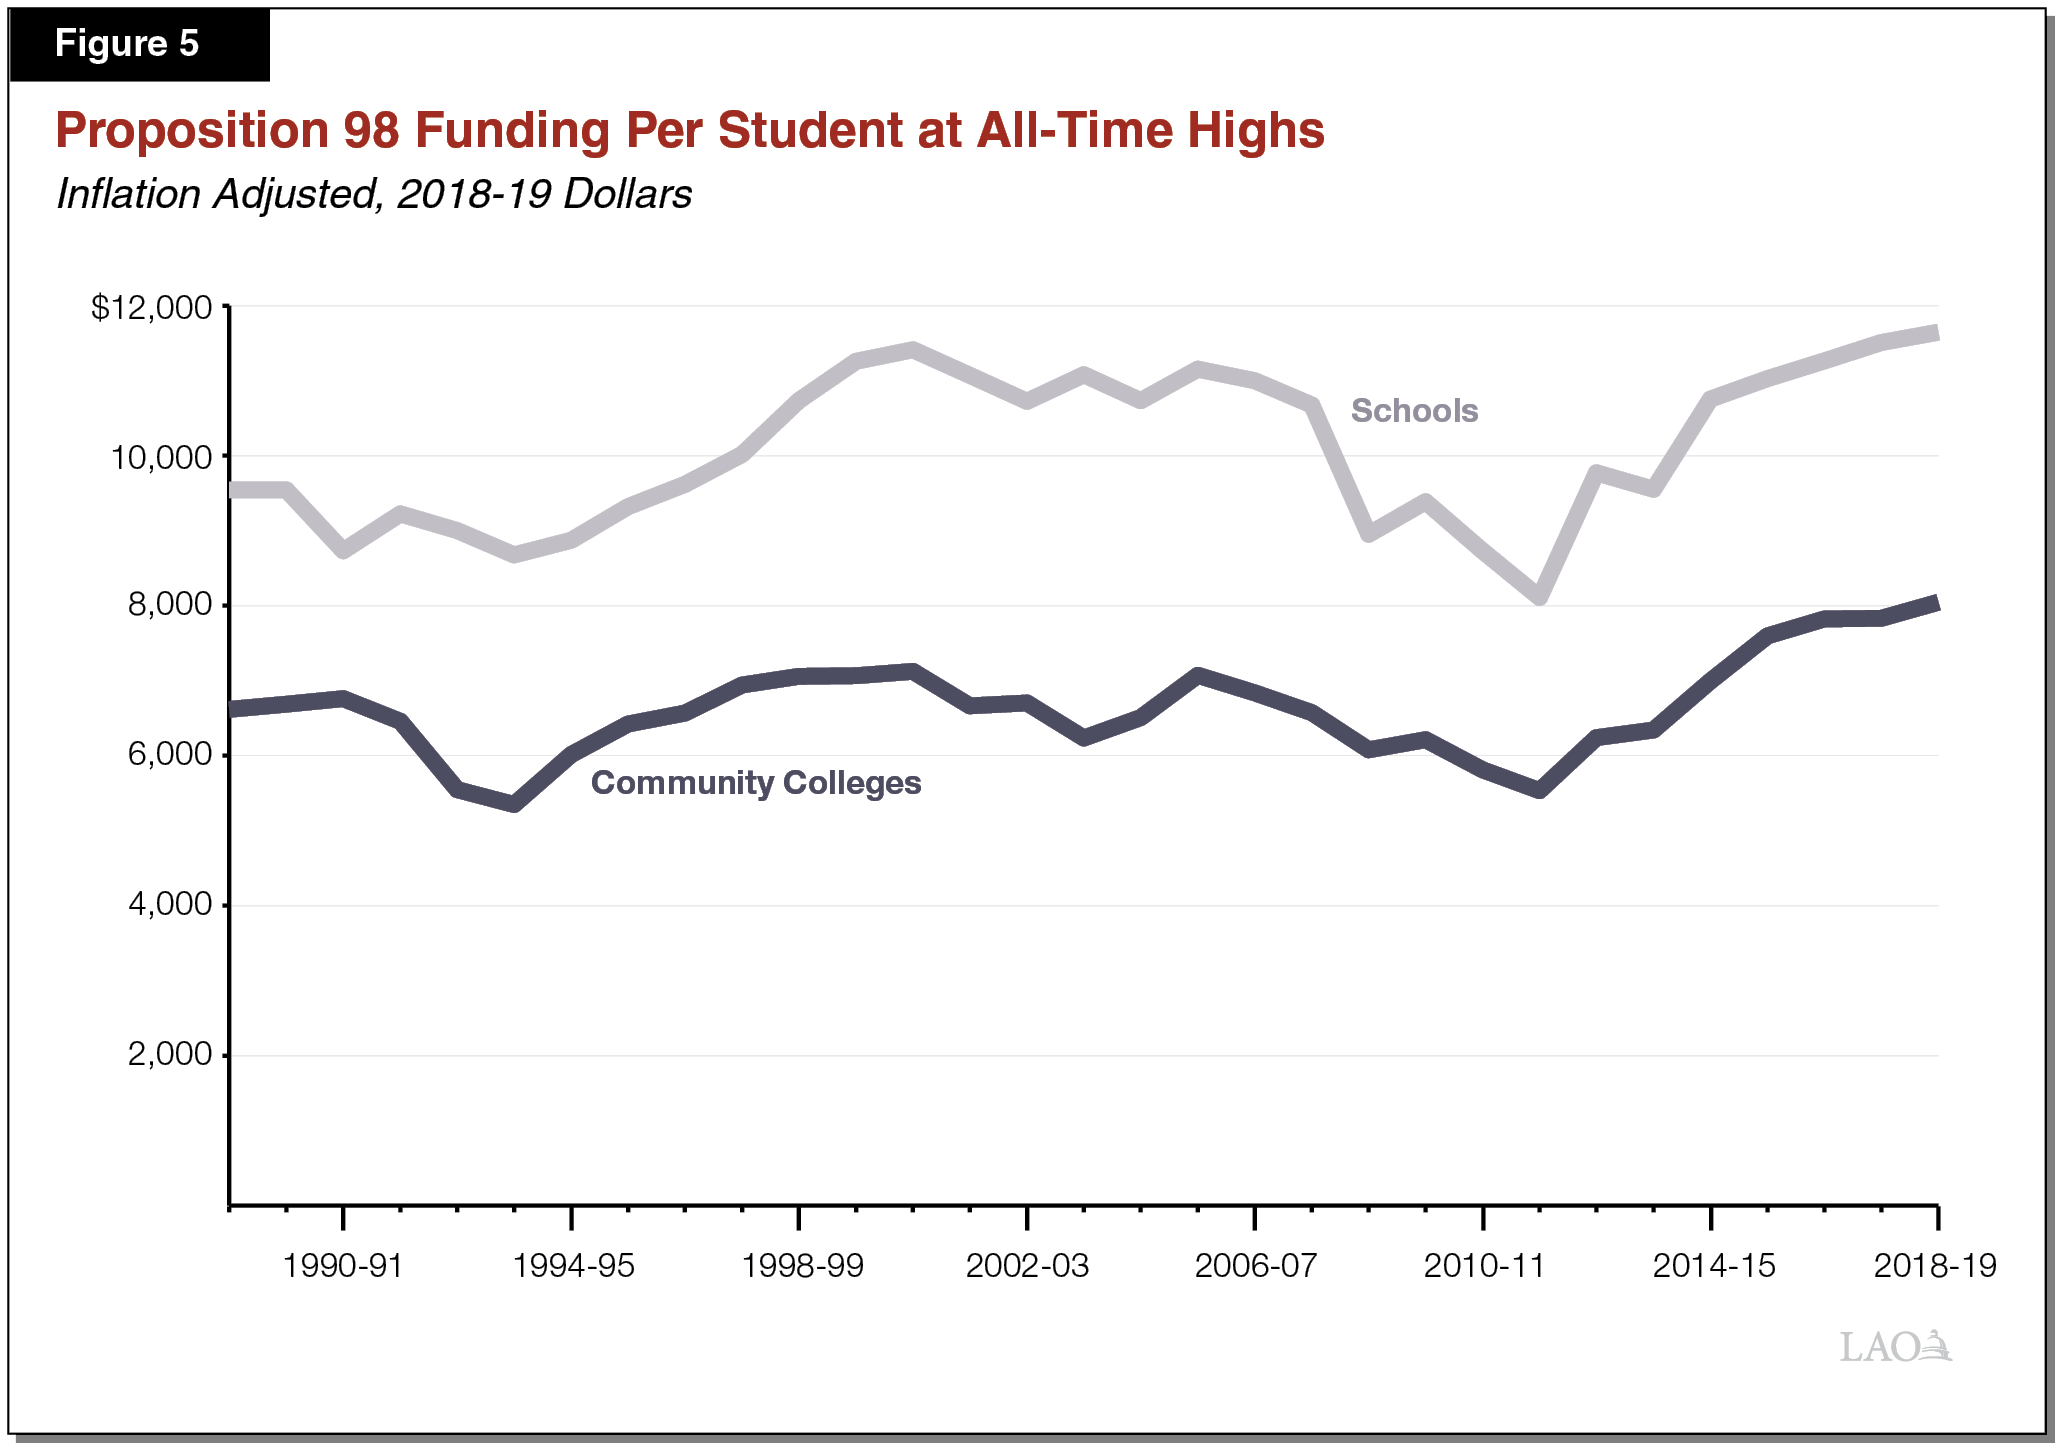 Figure 5 - Proposition 98 Funding Per Student at All-Time High